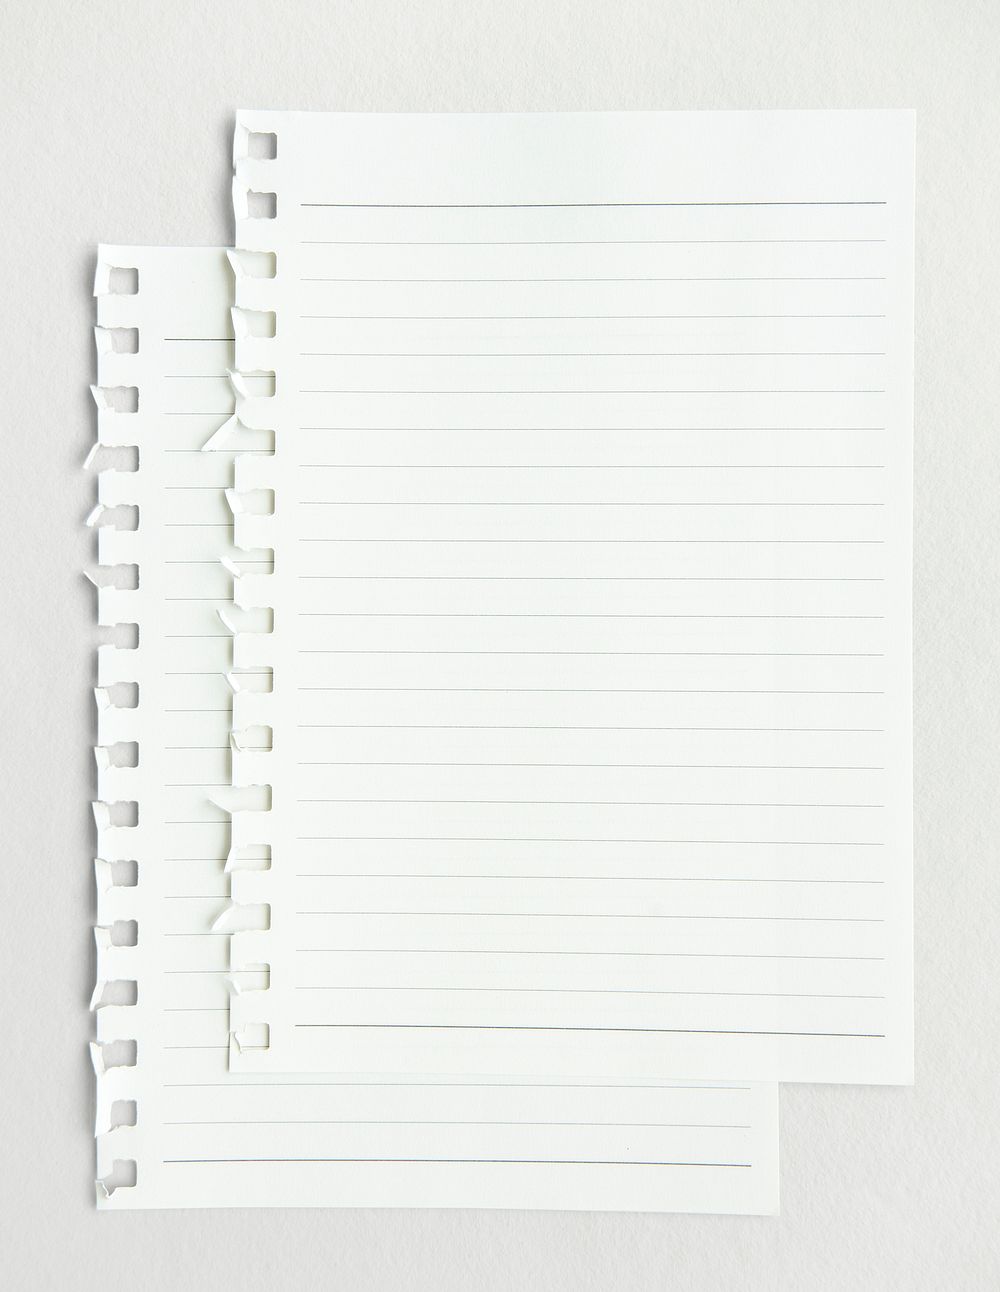 Blank white lined paper template